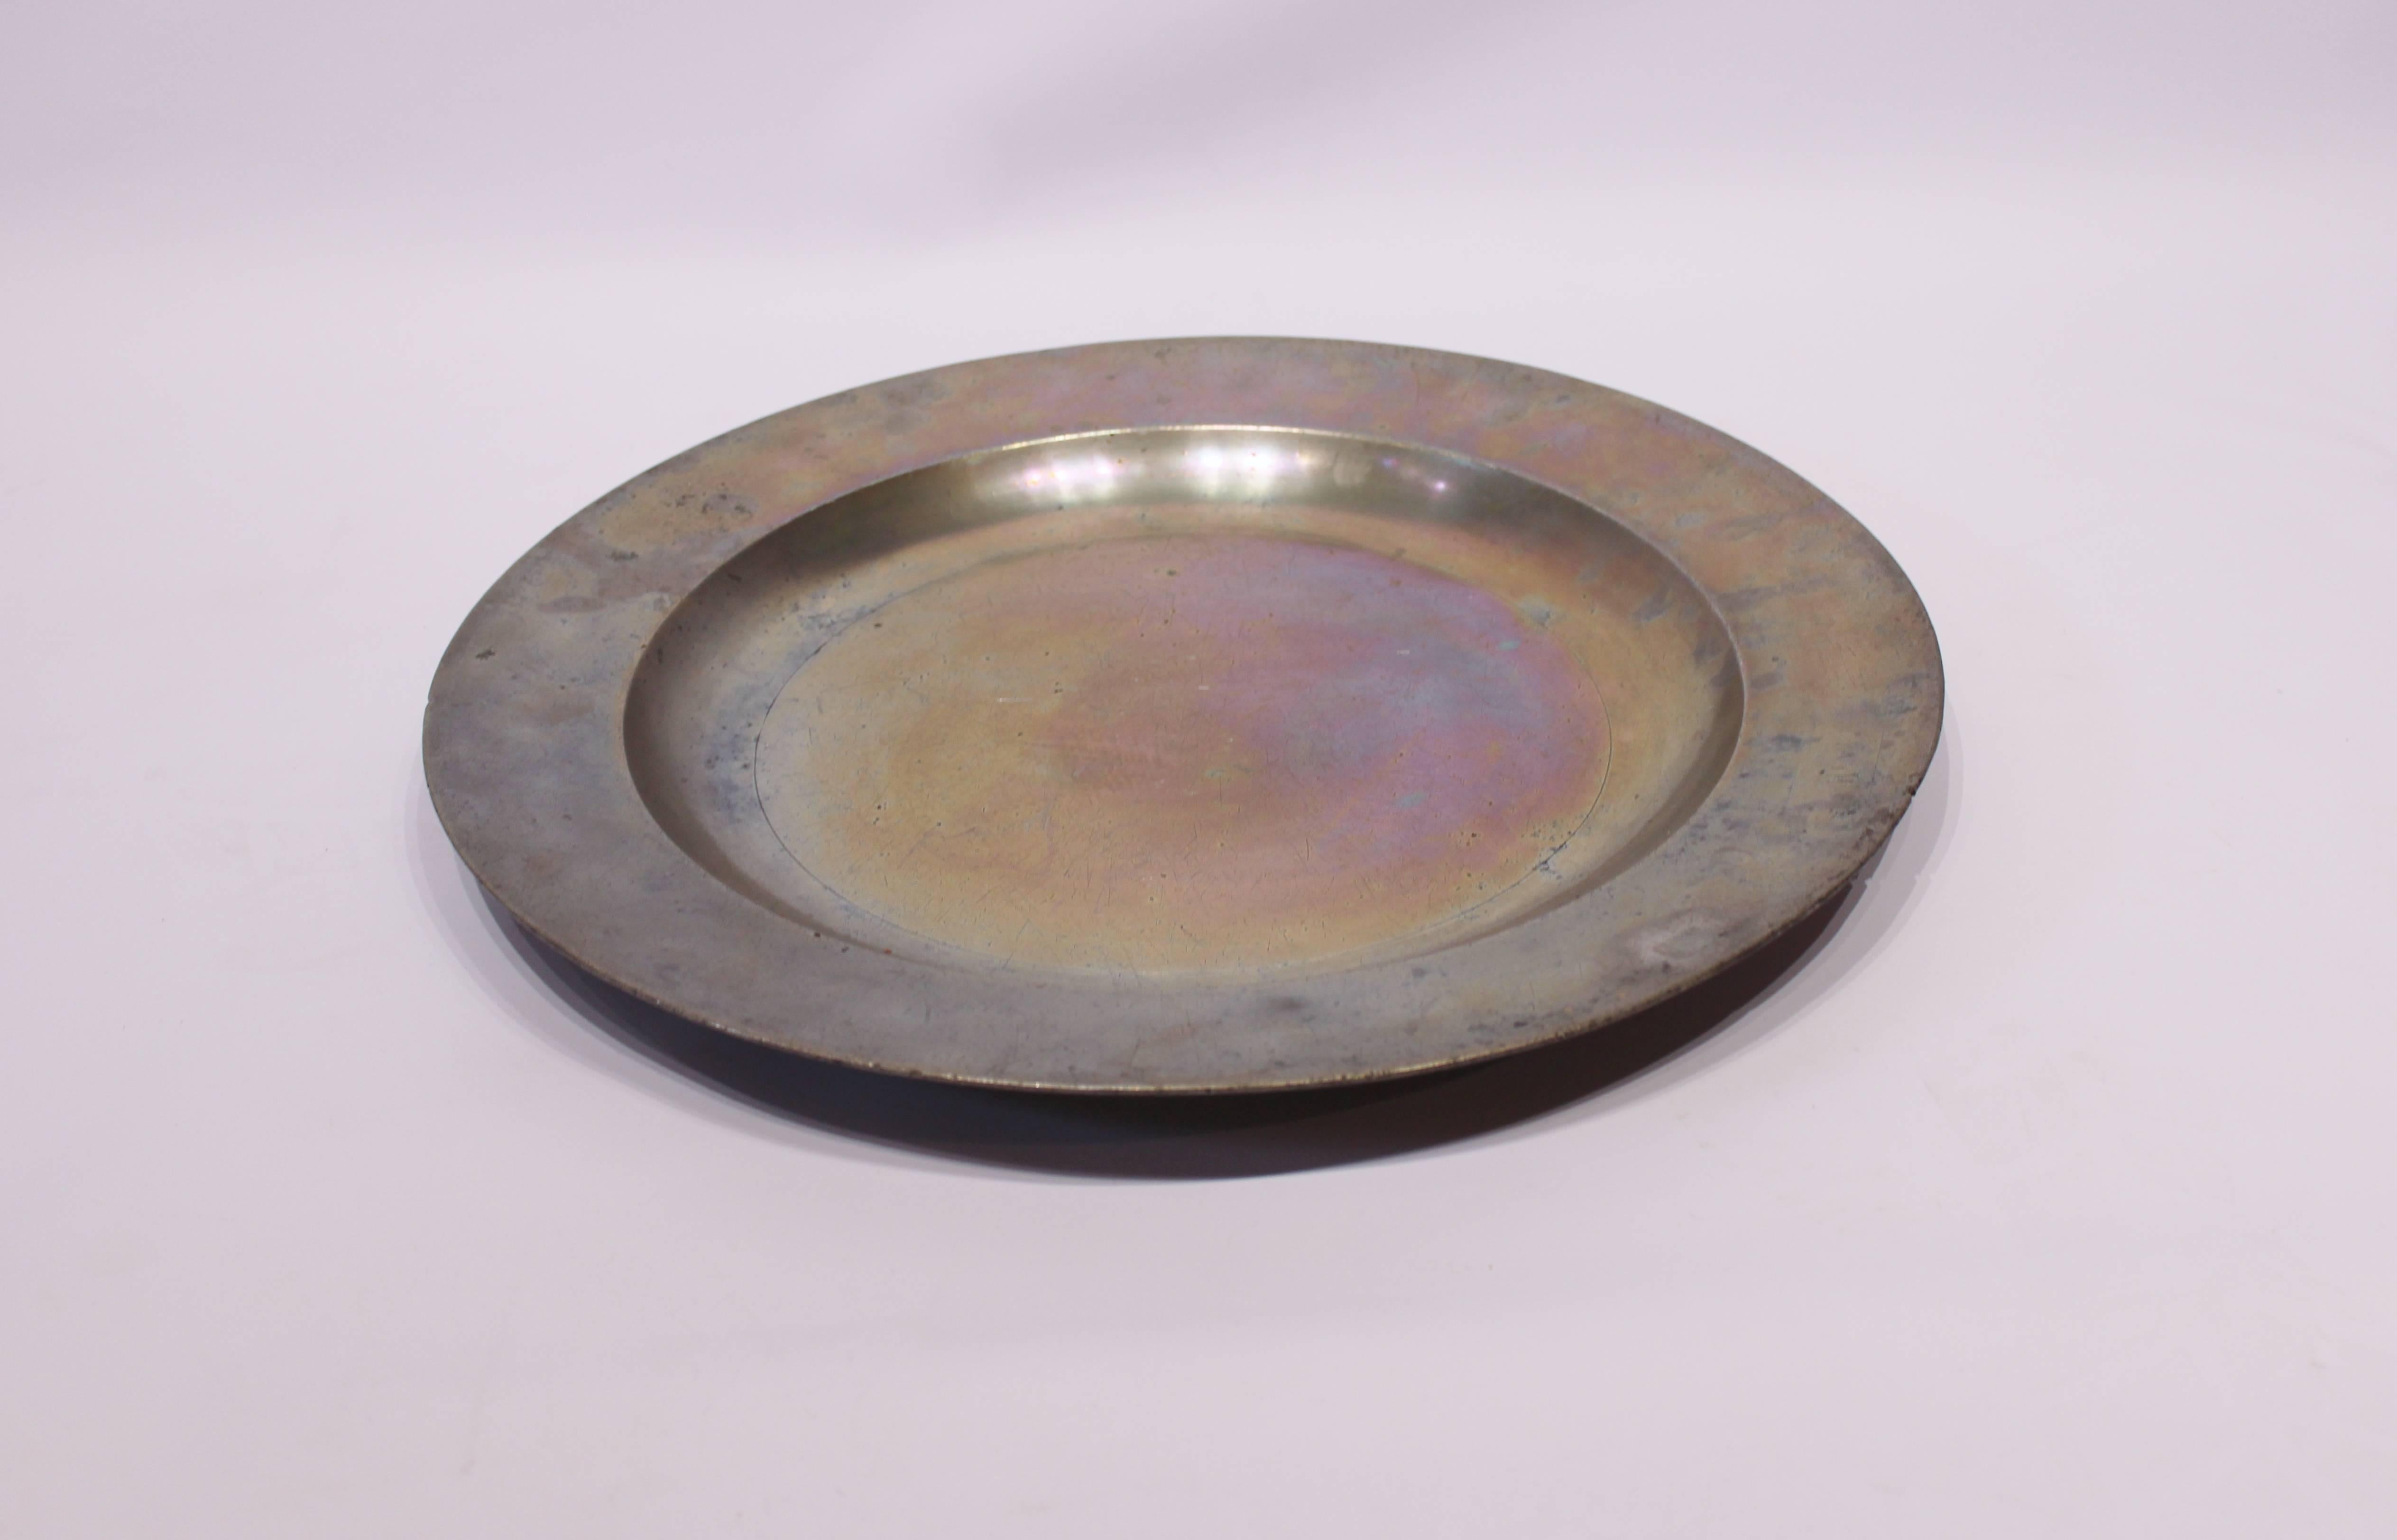 Large round tin dish from the 1820s and in great vintage condition.